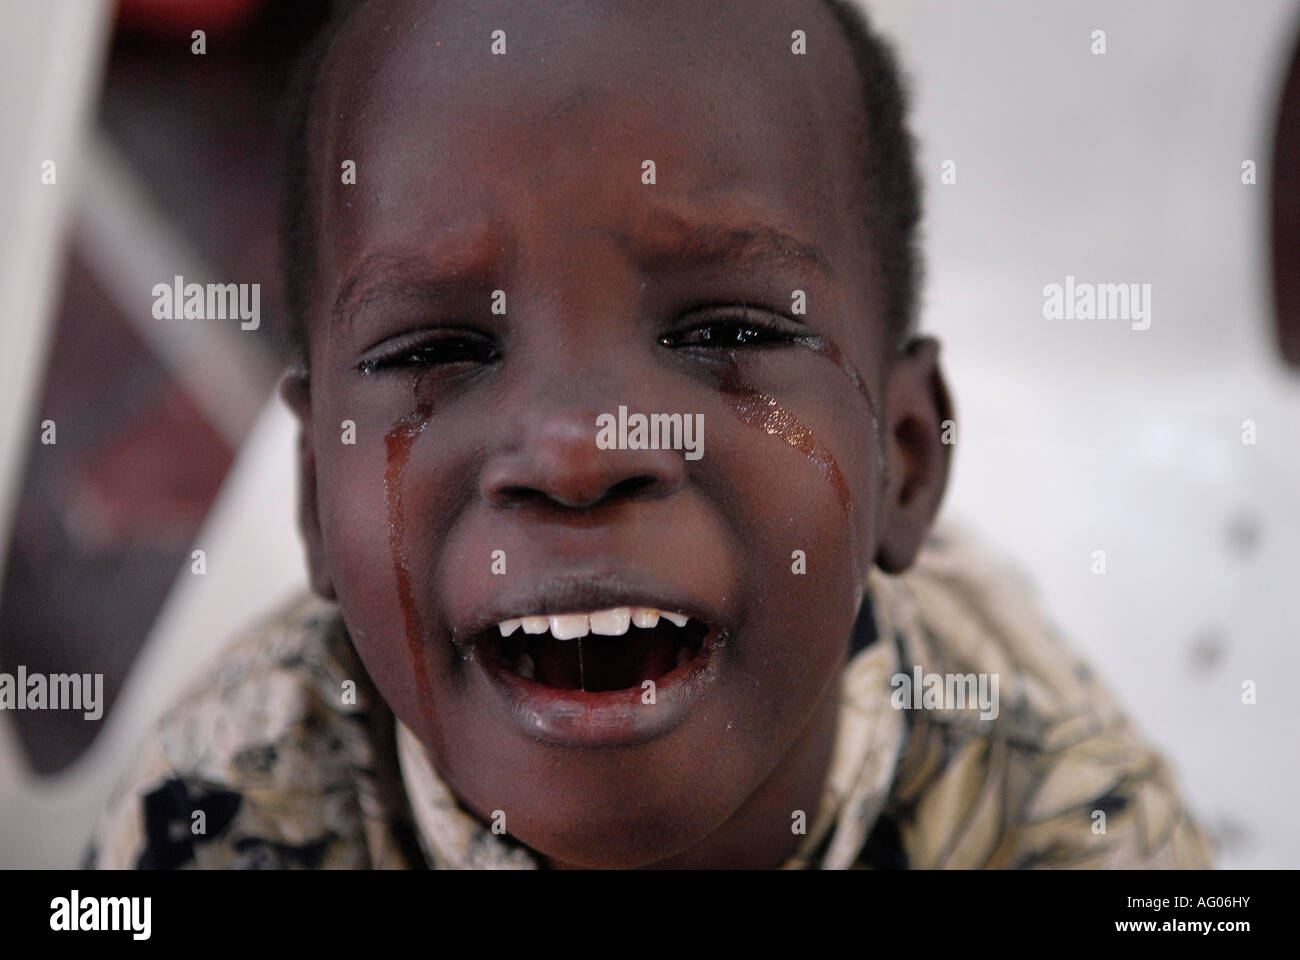 Young African boy crying Stock Photo